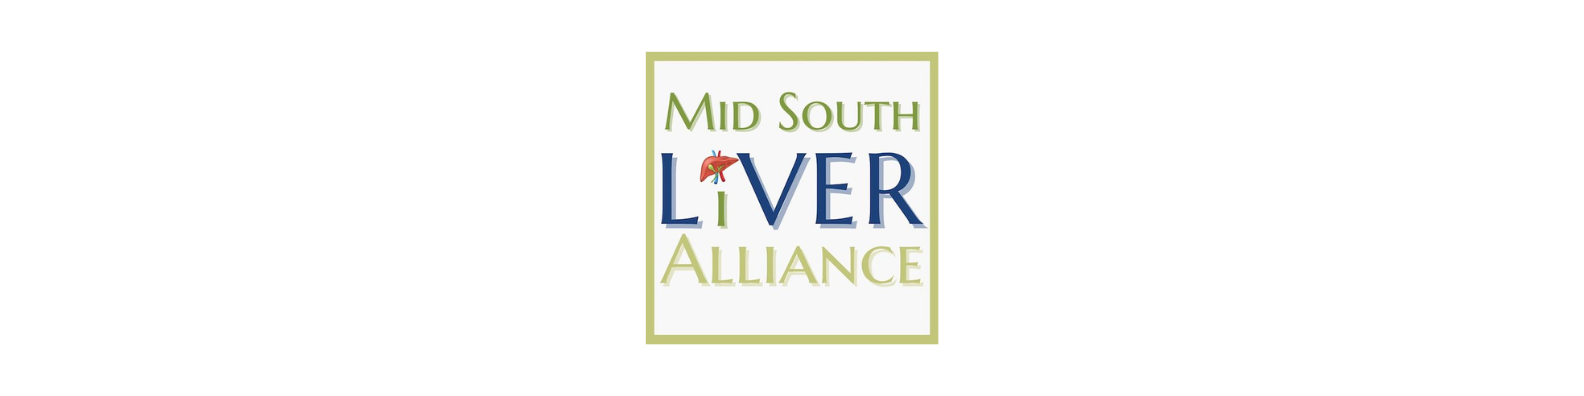 Mid South Liver Alliance